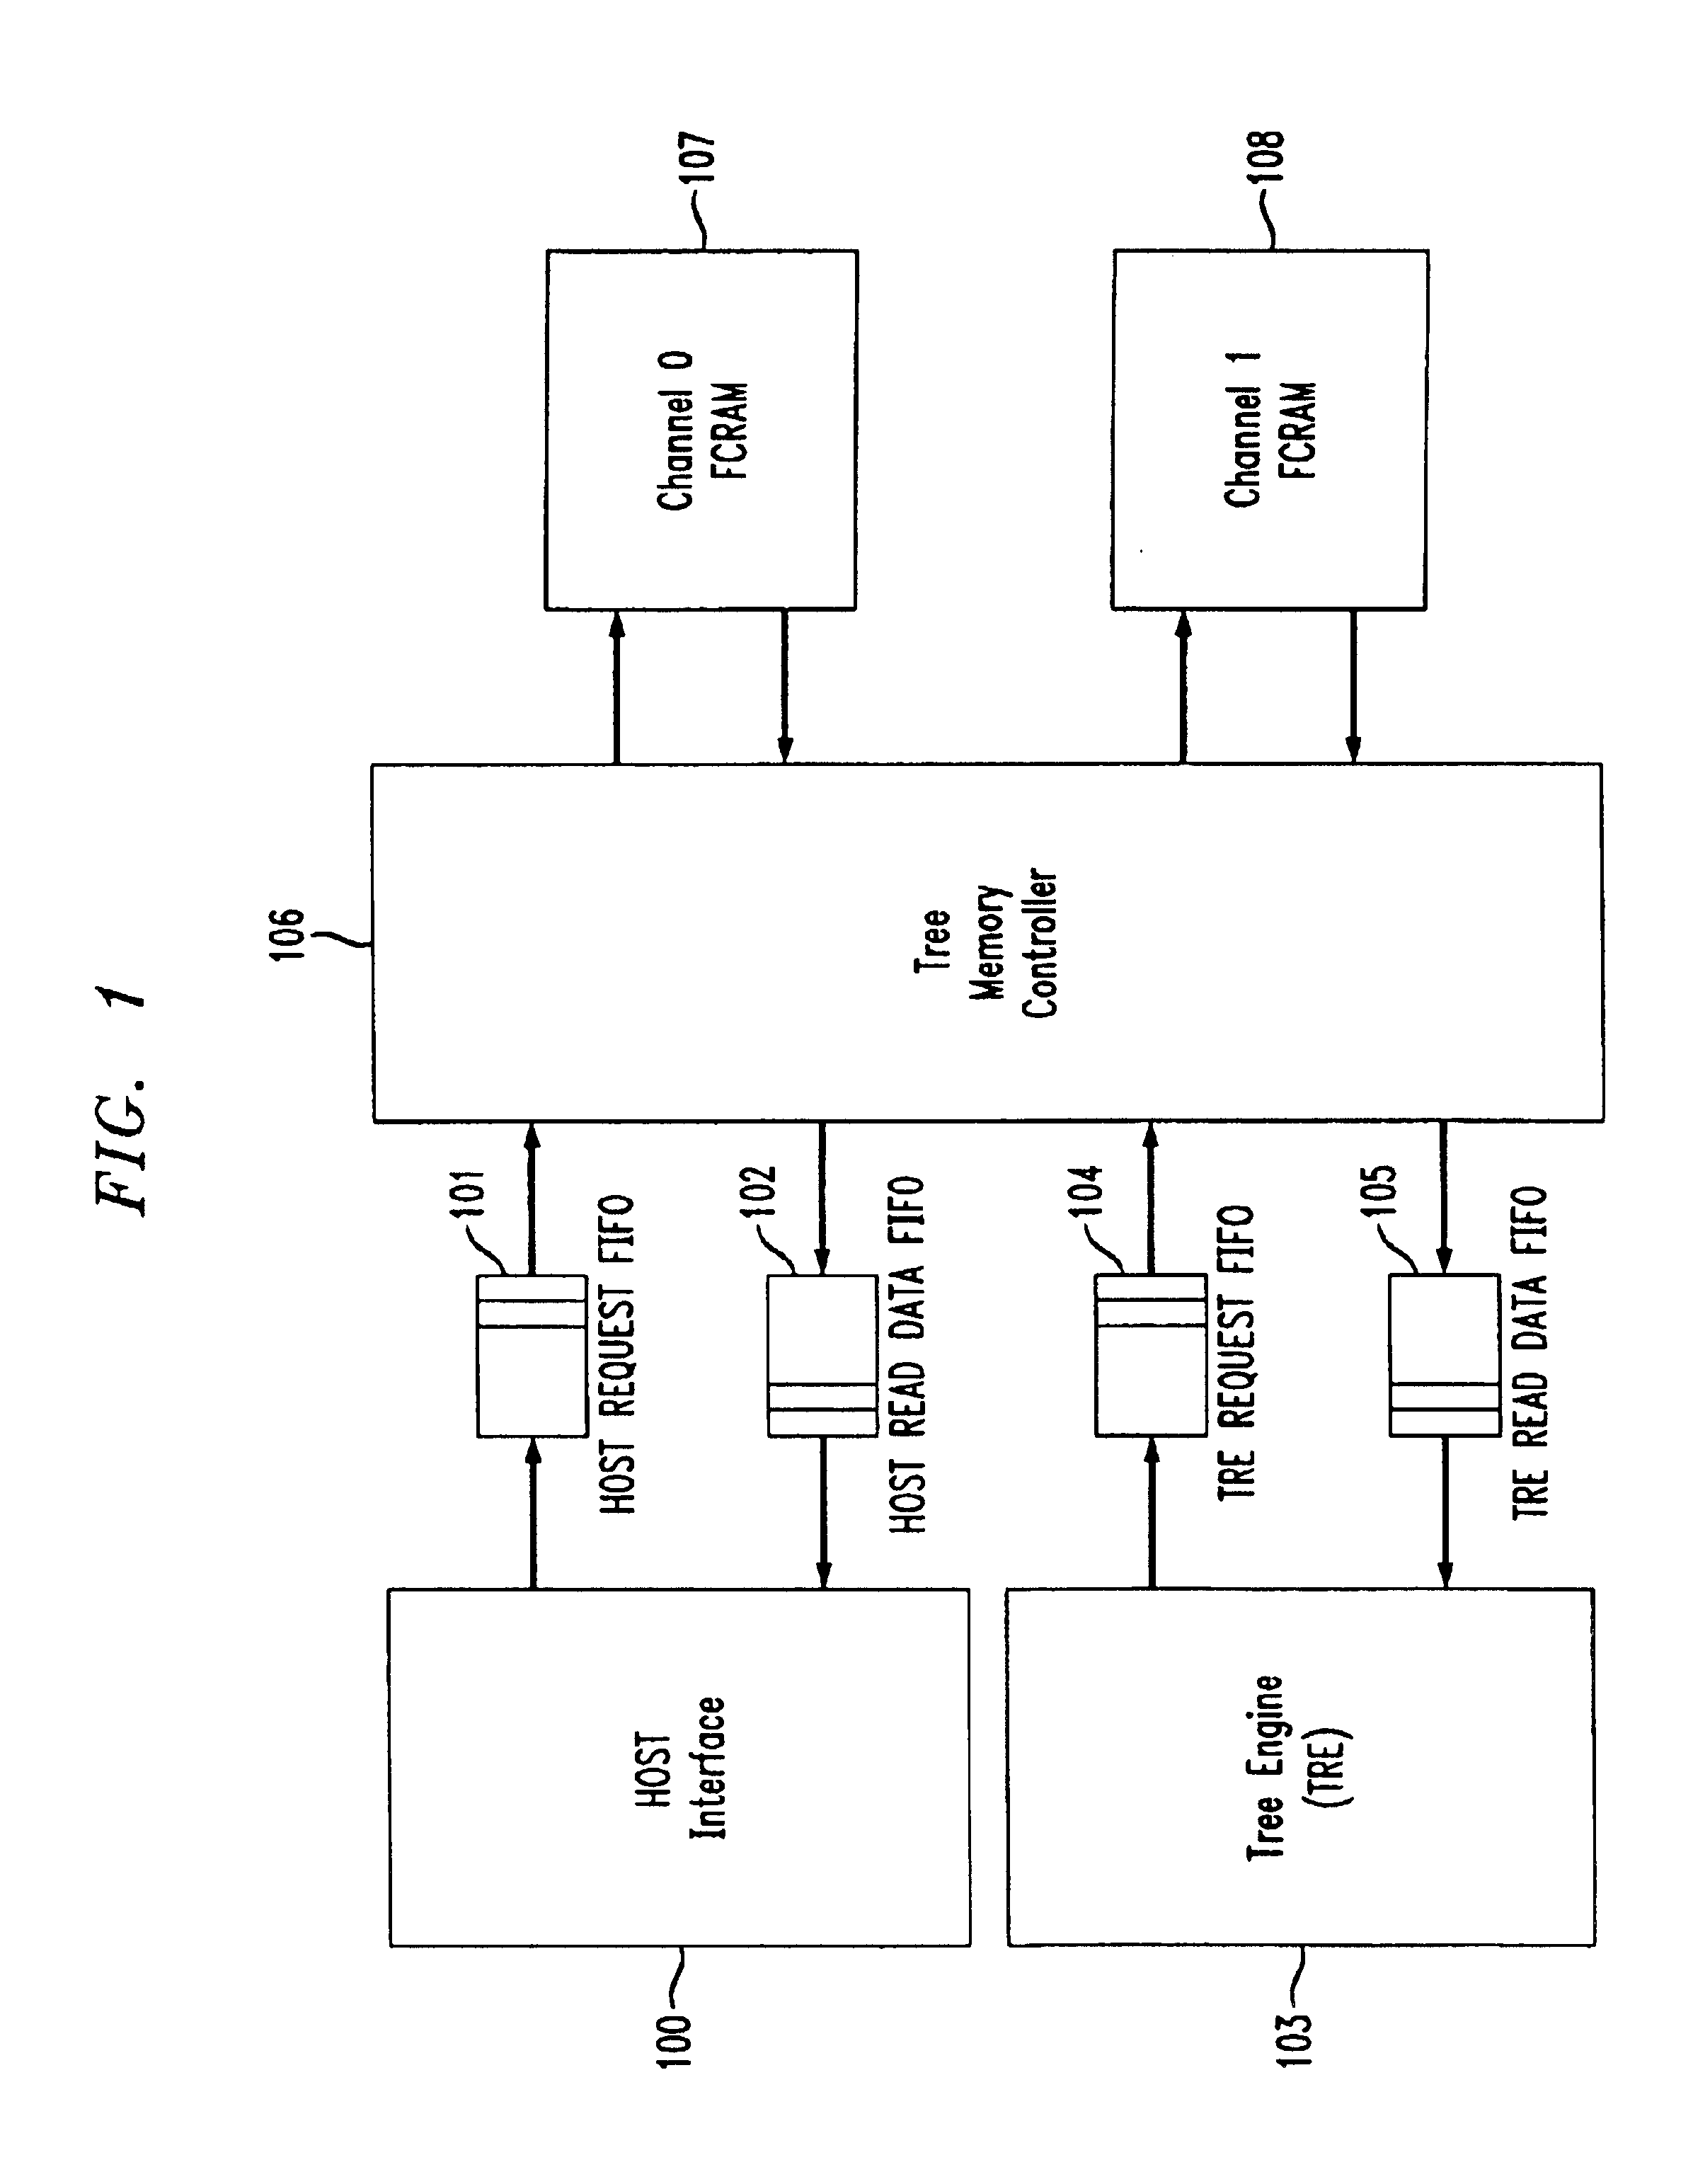 Multi-bank scheduling to improve performance on tree accesses in a DRAM based random access memory subsystem